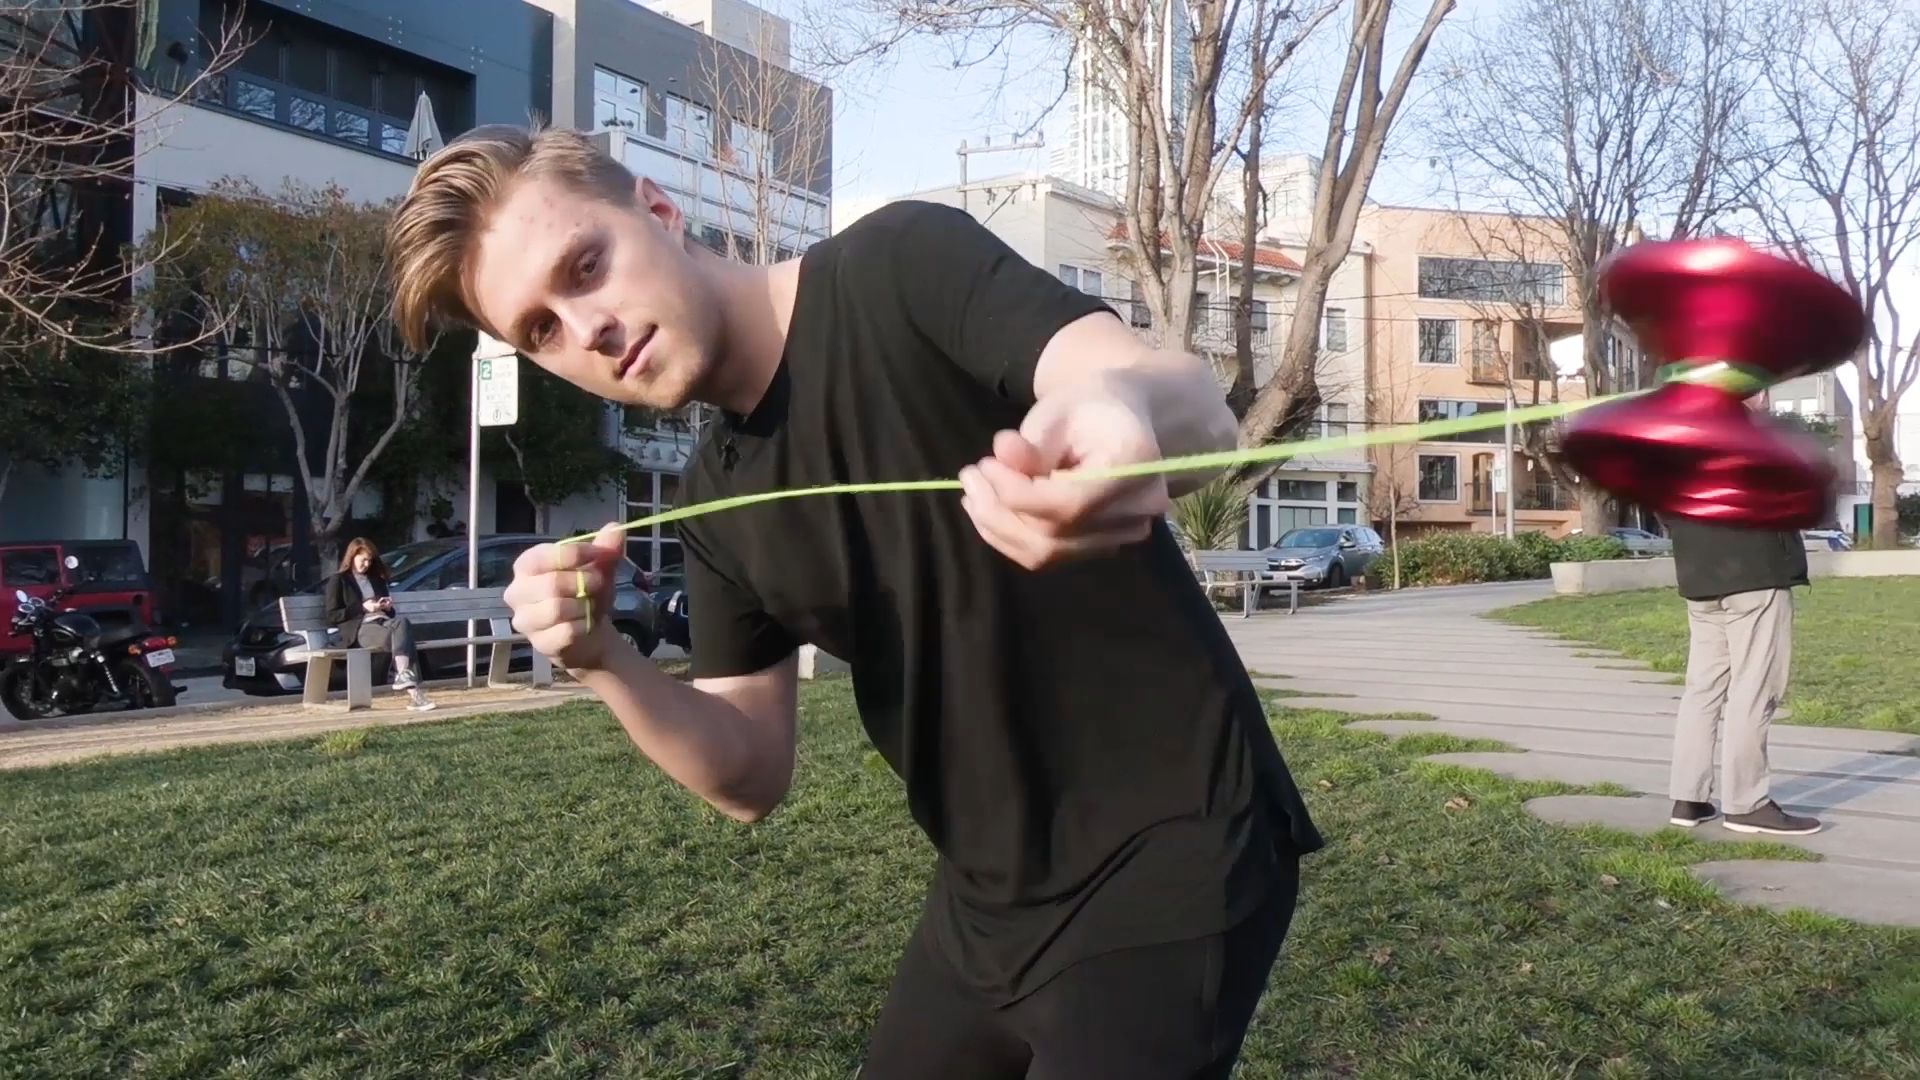 How This Guy World Yo-Yo | Obsessed | WIRED